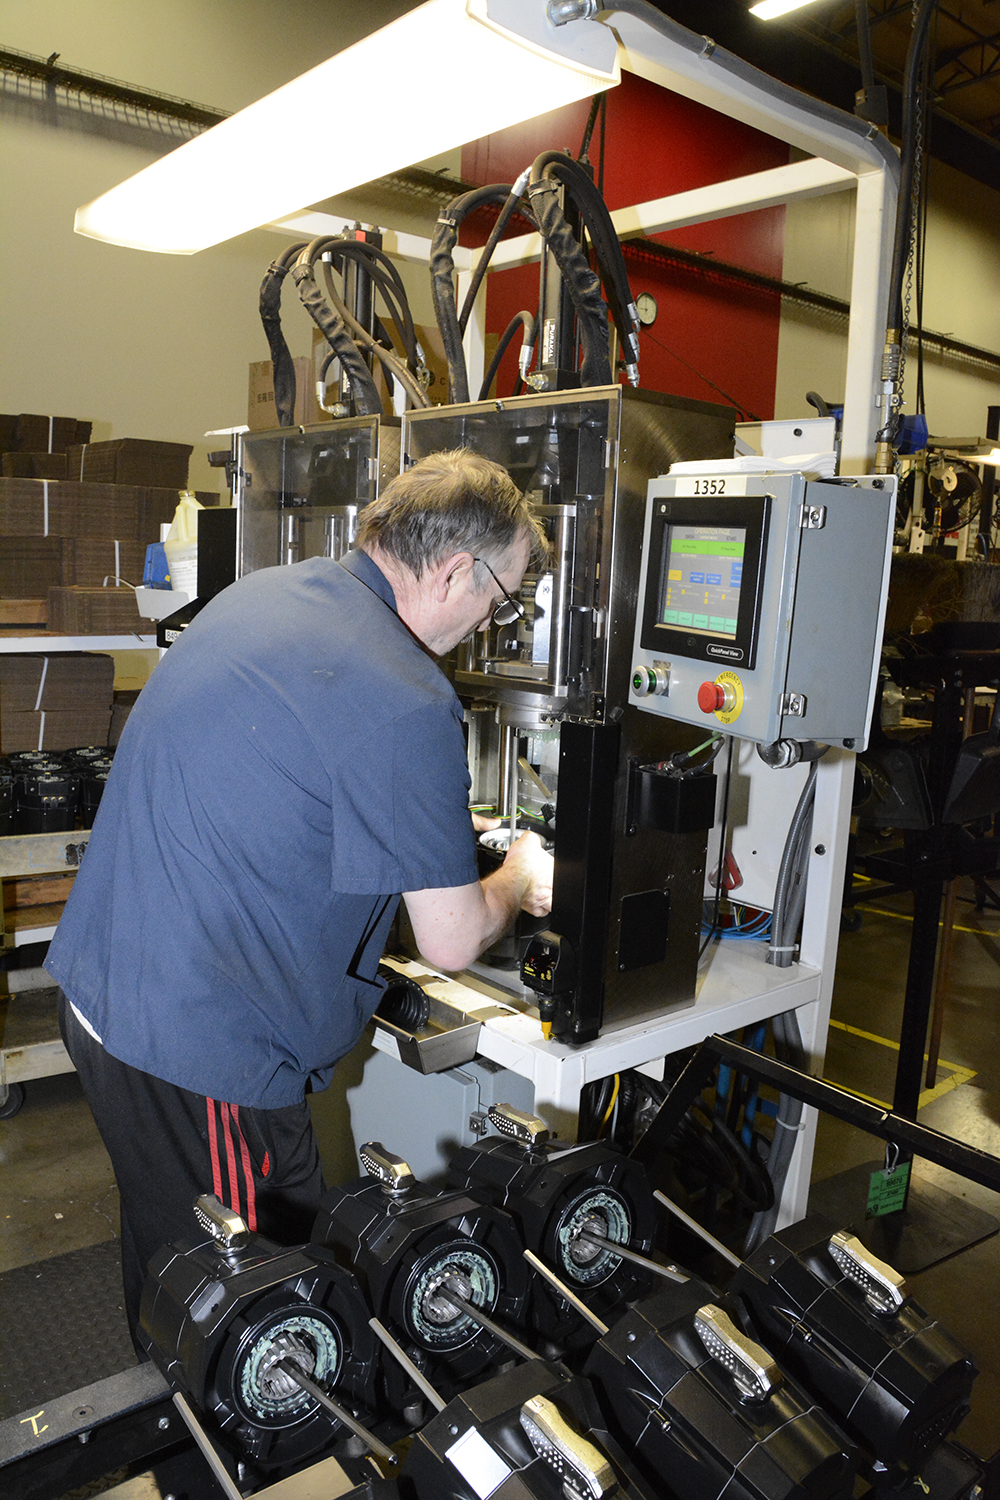 WARN’s newest line of winches, Zeon’s progressing through complex assembly.